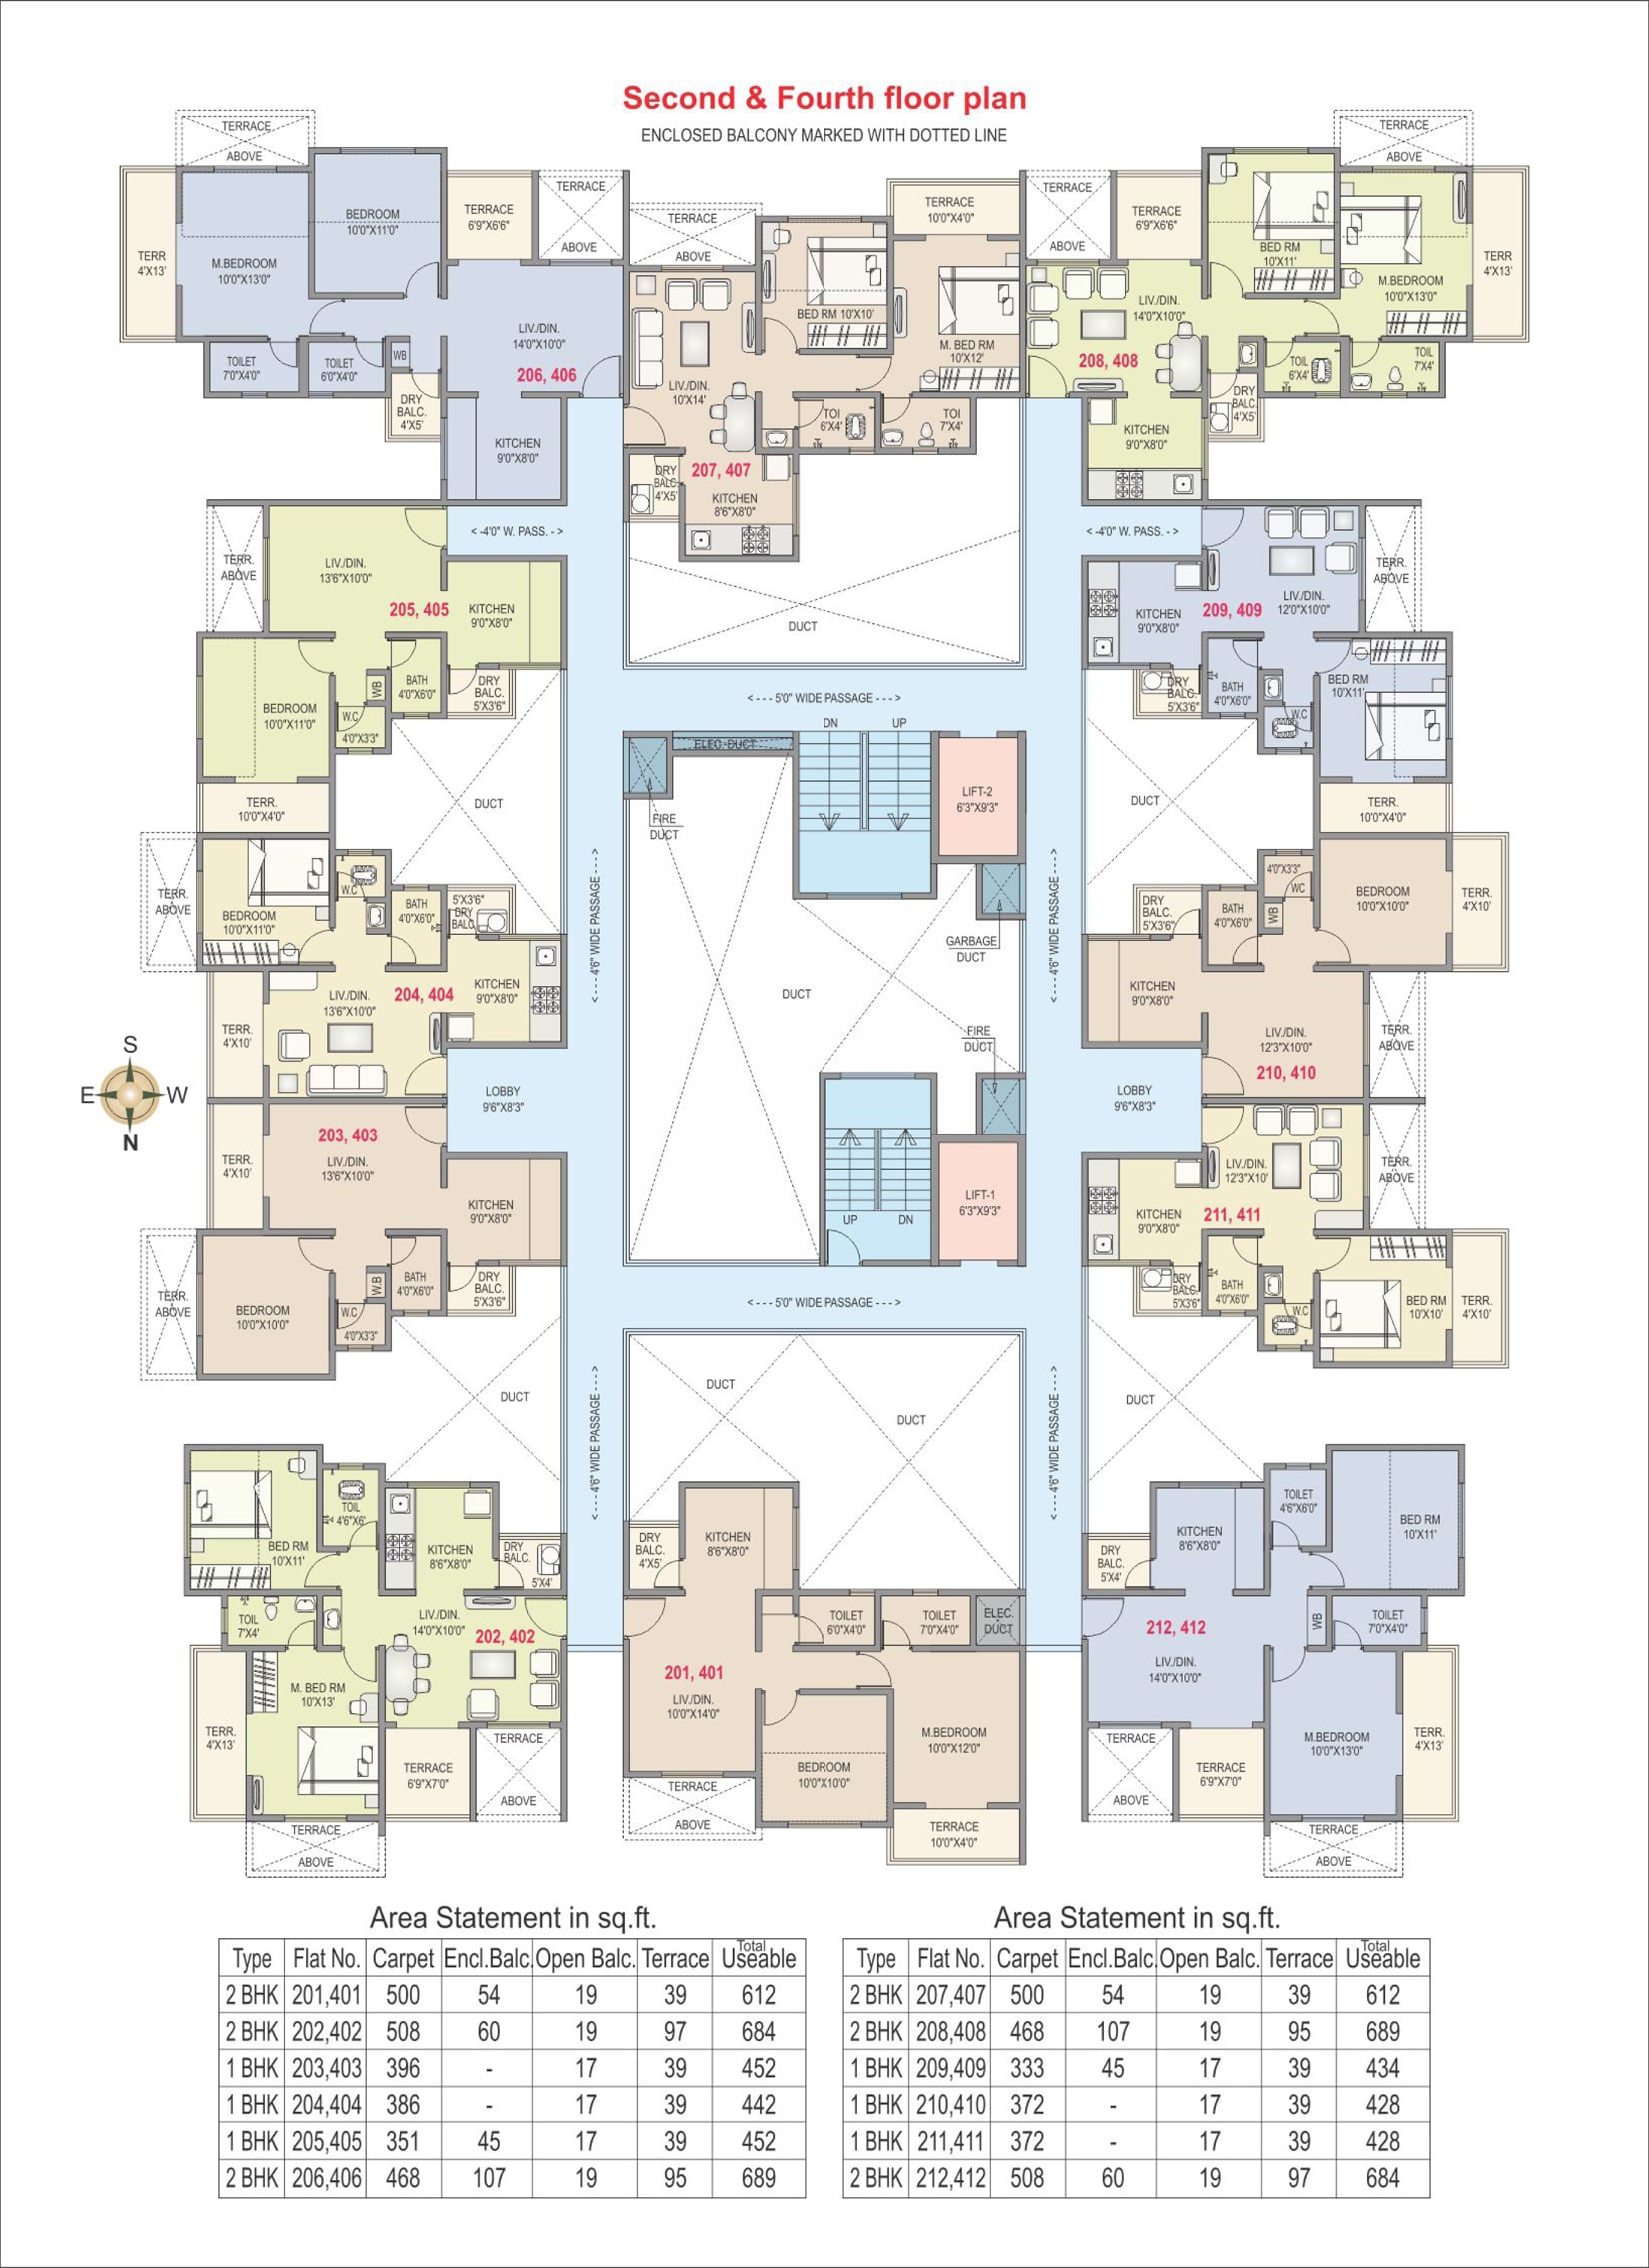 RKL Anand - Second and Fourth Floor Plan